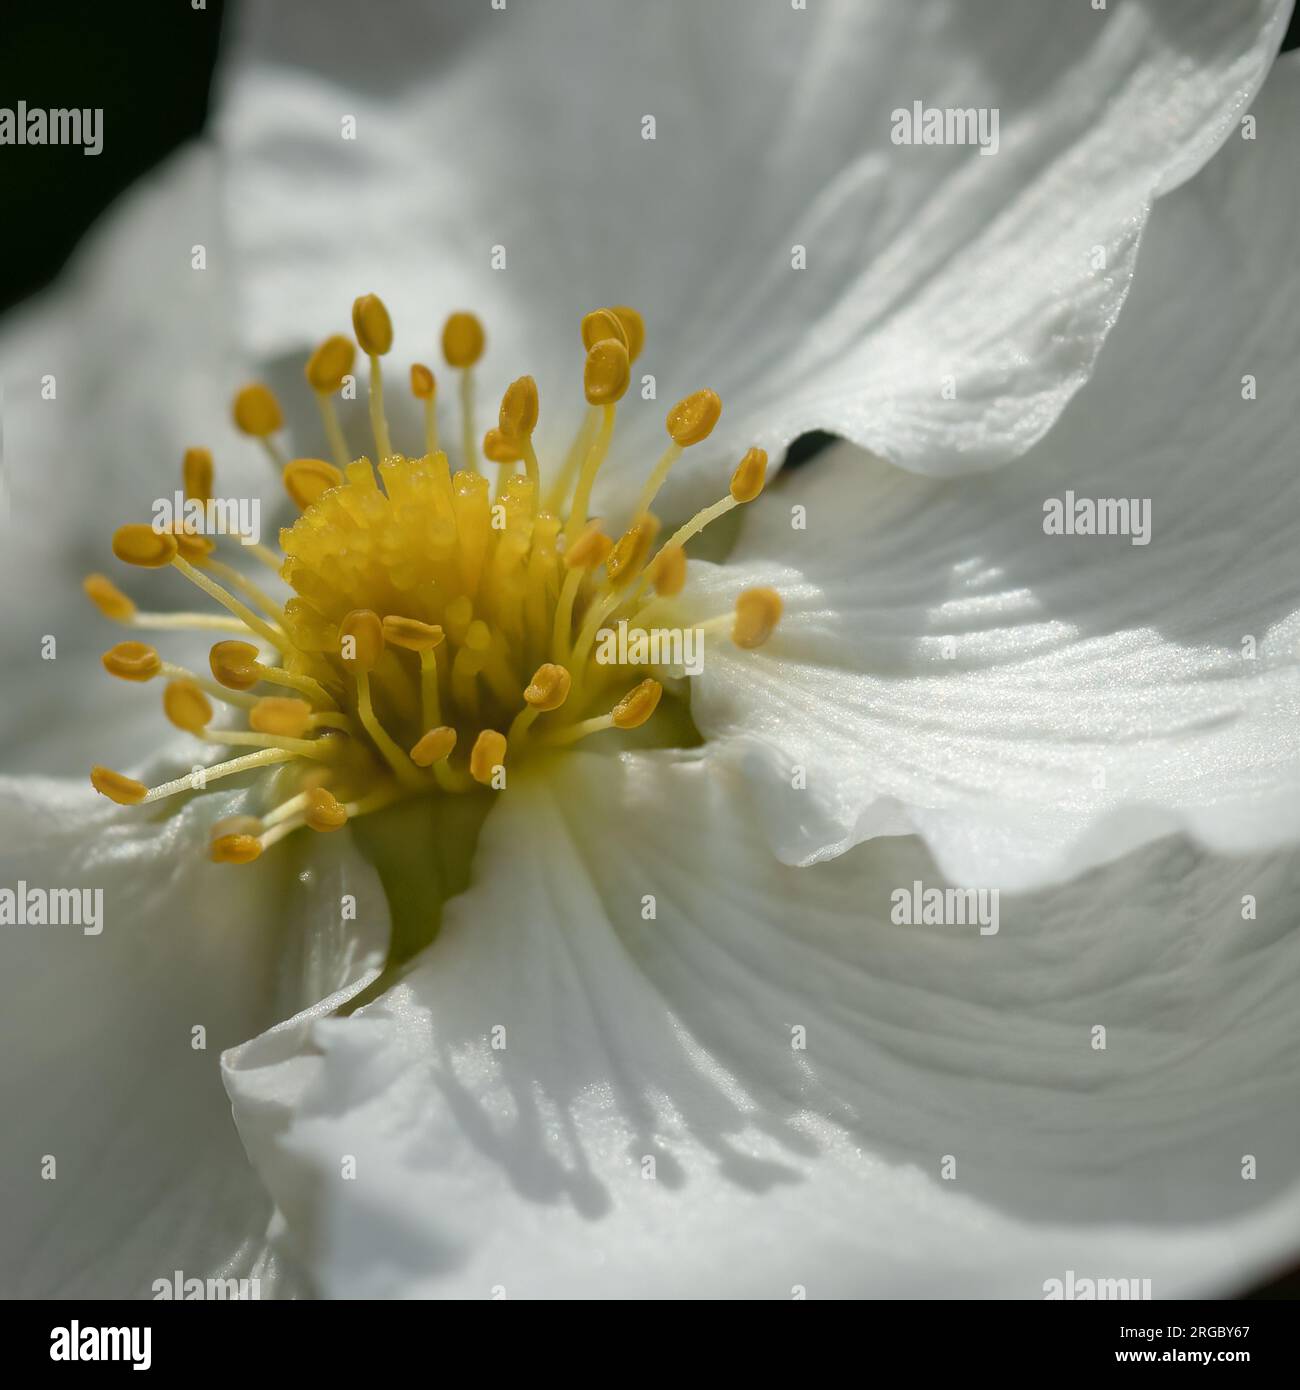 Single Potentilla Flower with White Petals and Yellow Stamen highlighted against a plain black background Stock Photo